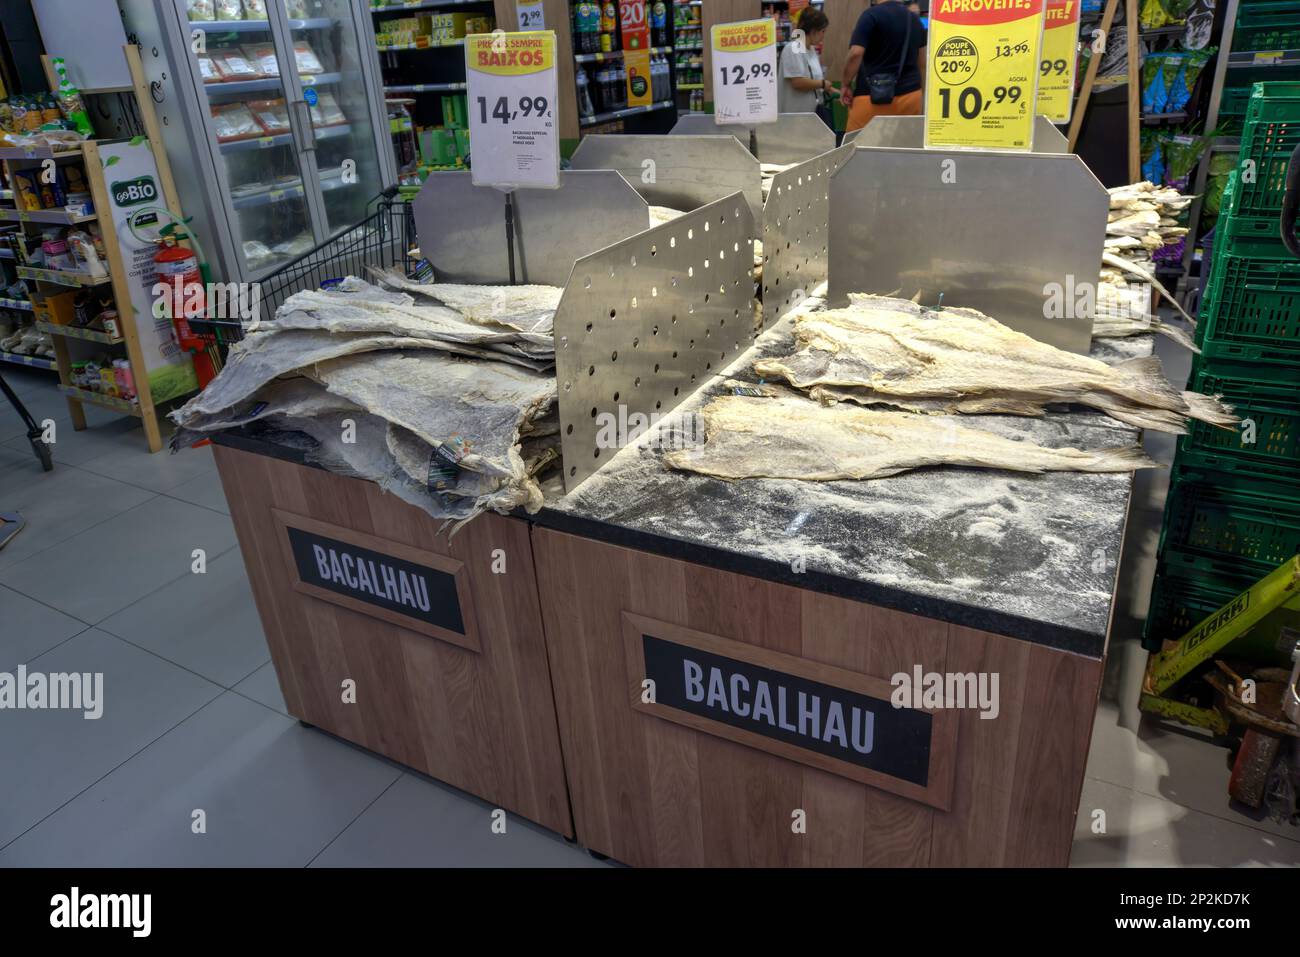 Coimbra, Portugal - August 15, 2022: Traditional fish dish of dried and salted cod (Bacalhau) on display in supermarket for purchase Stock Photo